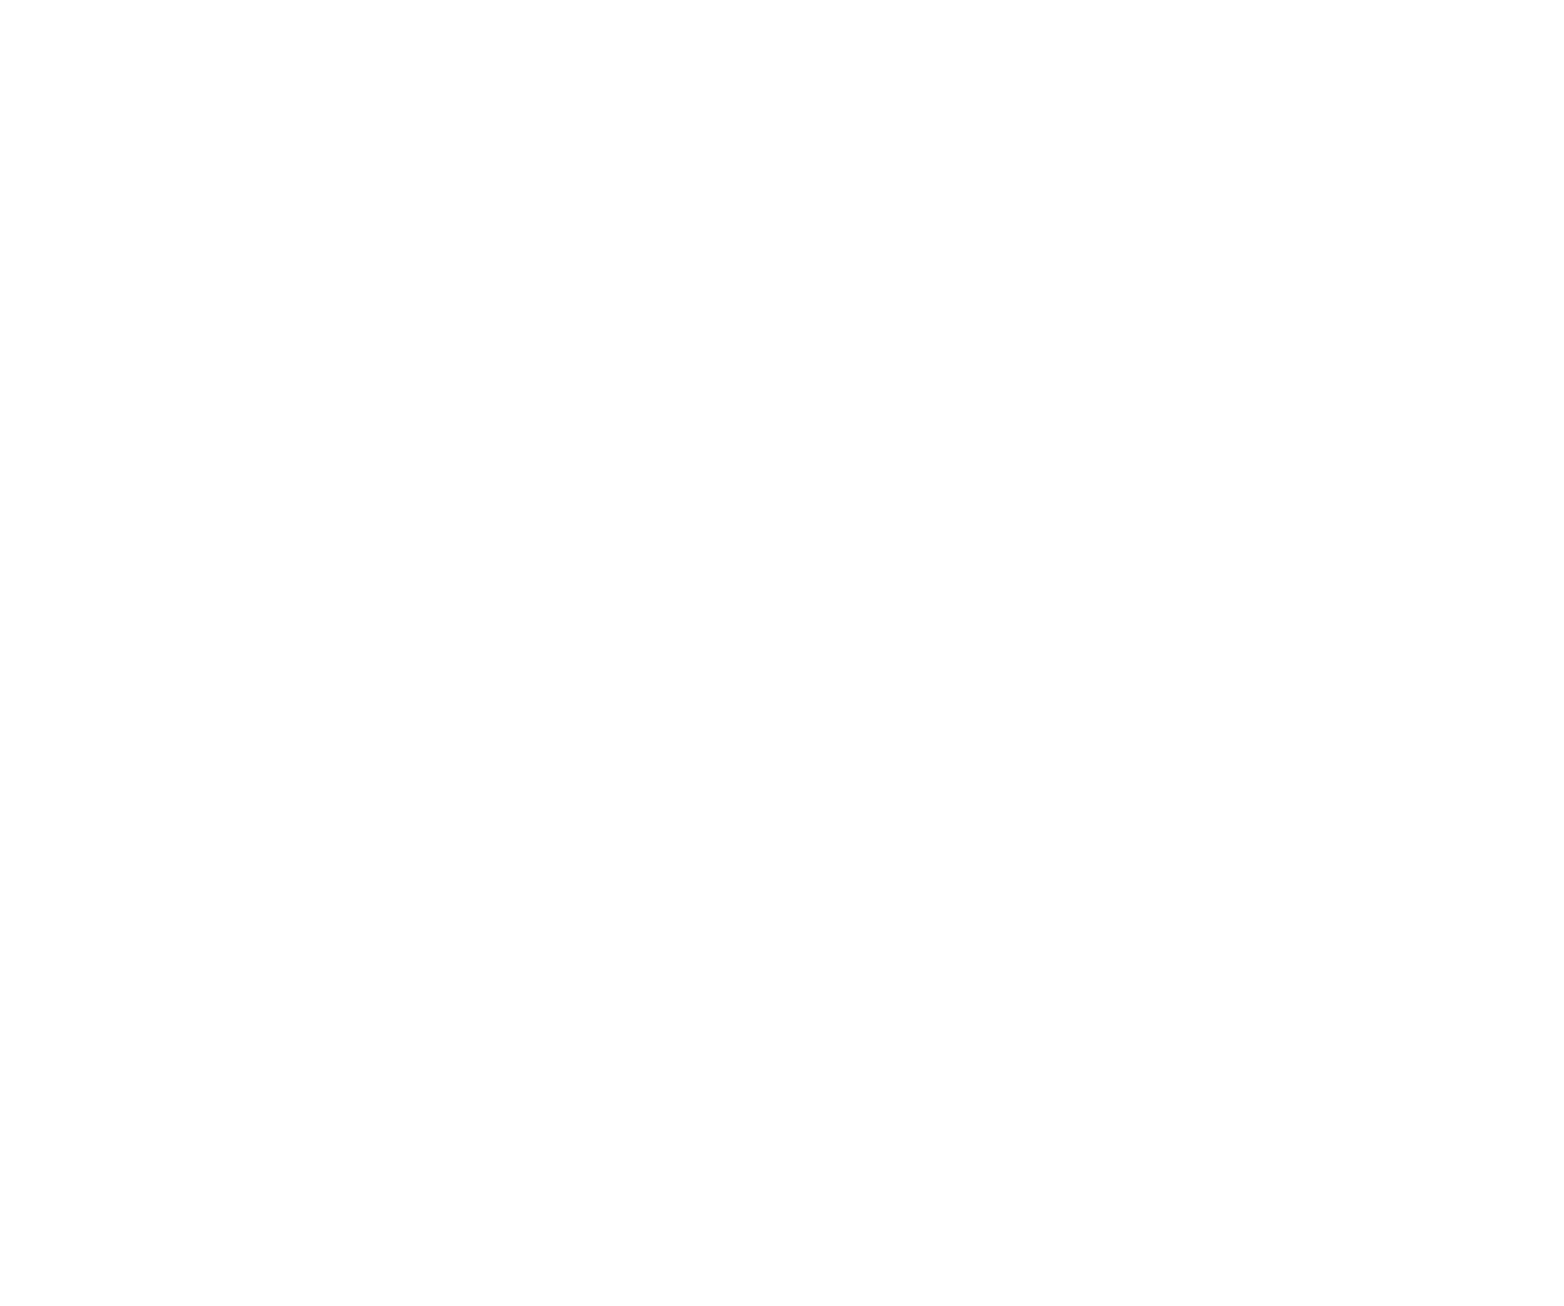 Vicarious Surgical logo large for dark backgrounds (transparent PNG)